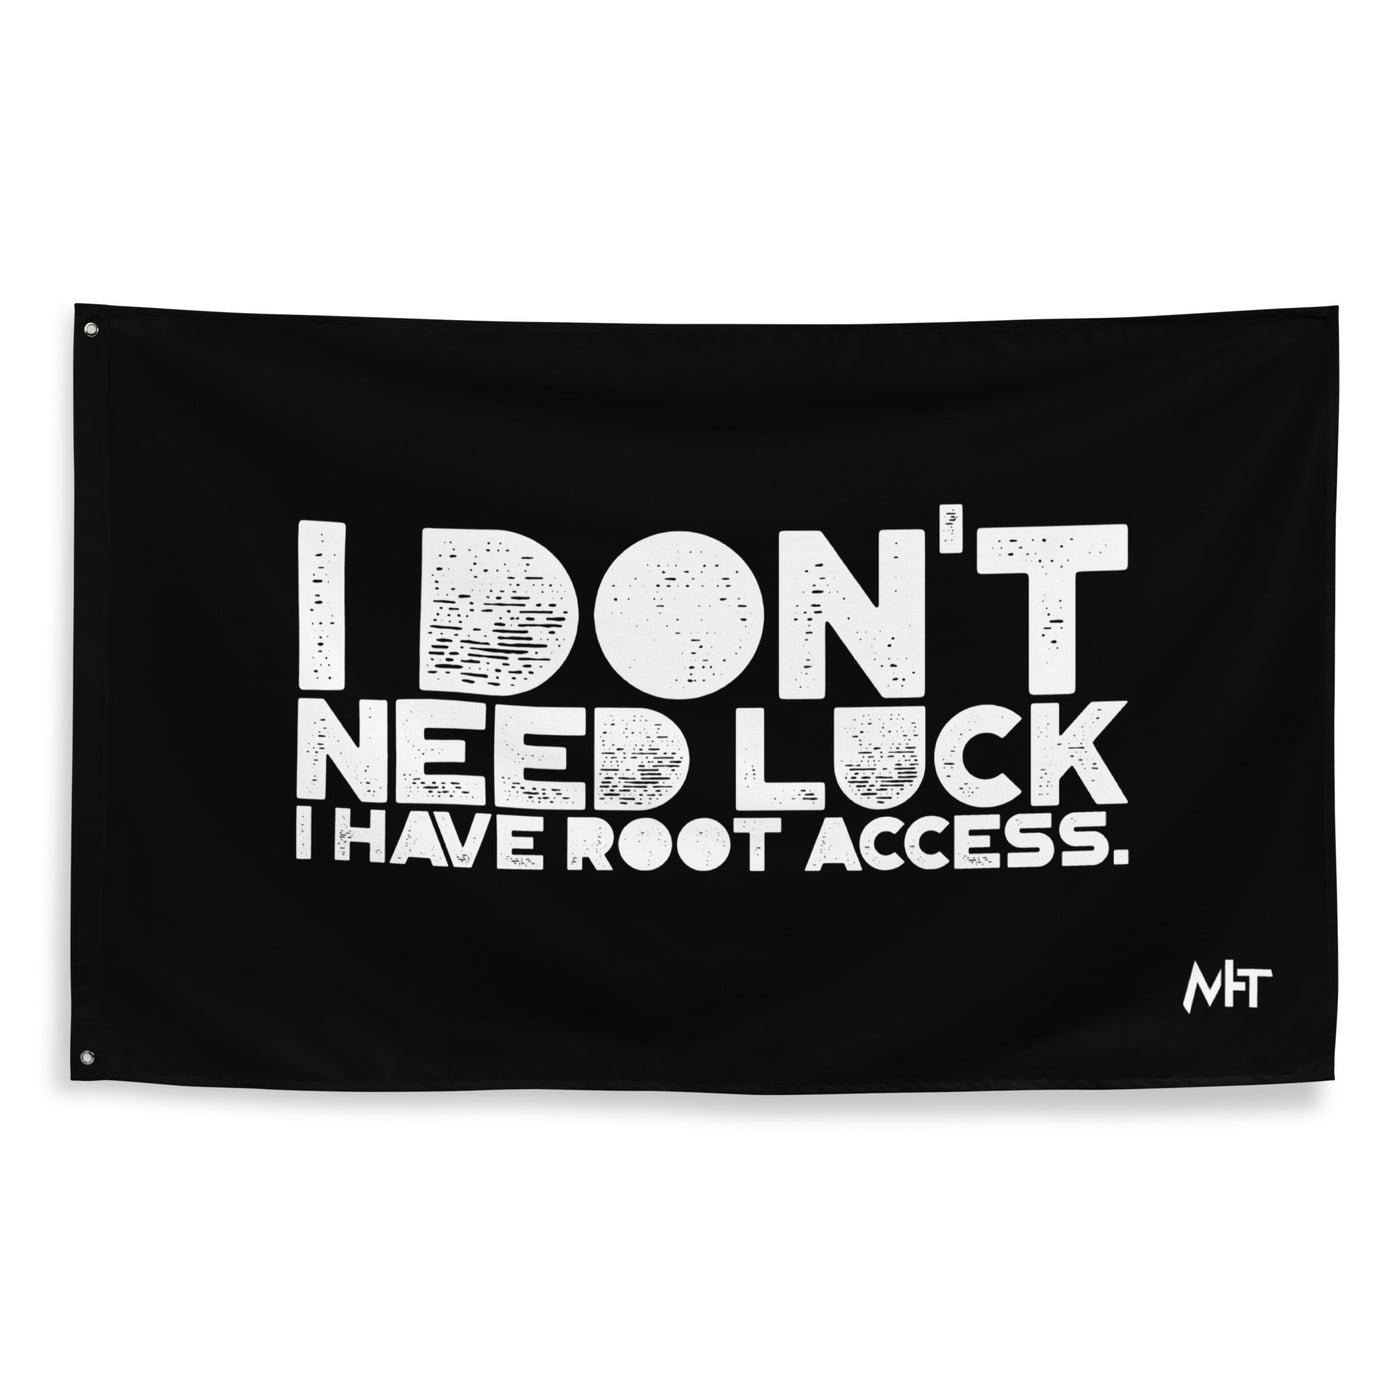 I Don't Need Luck: I Have Root Access - Flag